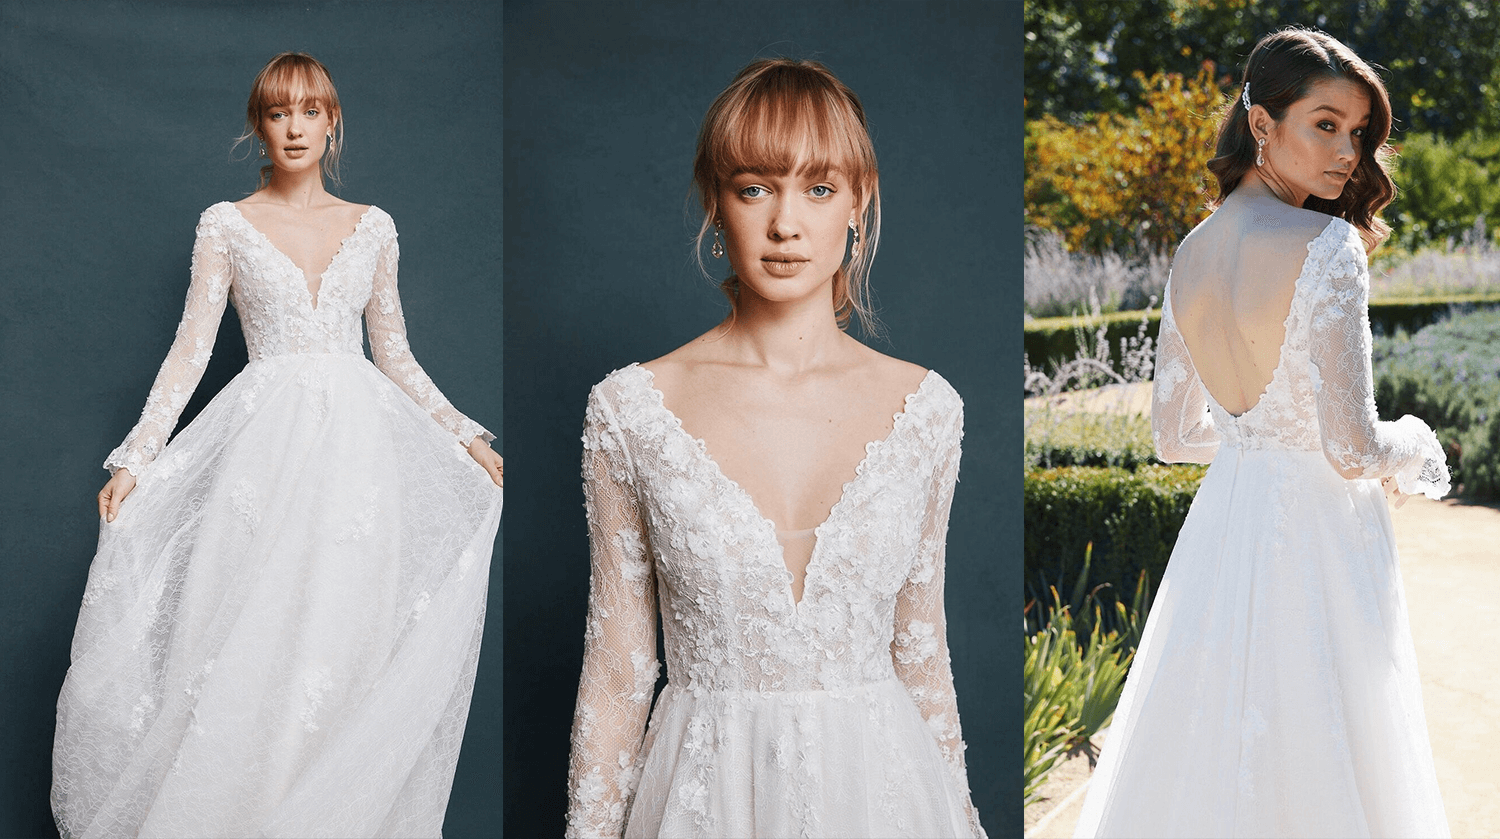 A lacy flowing wedding dress with long sleeves